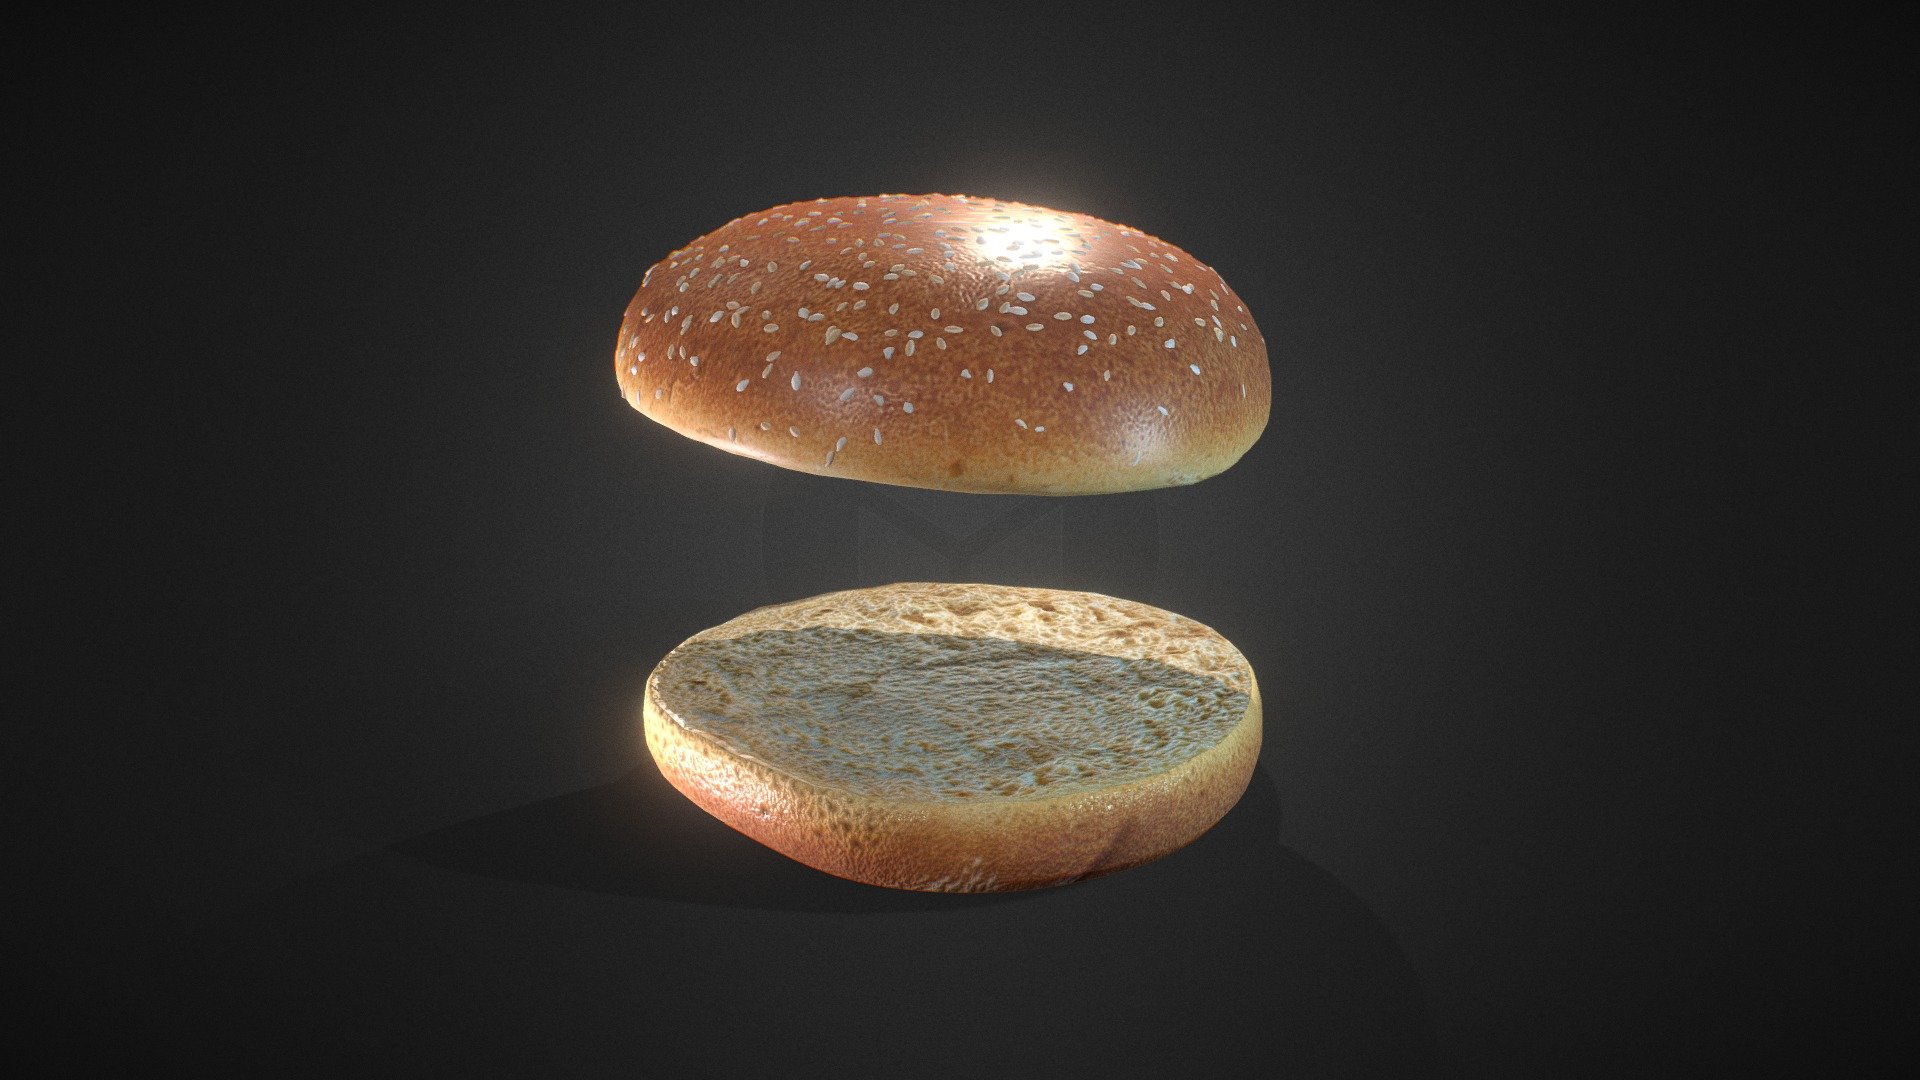 Here is a 3d model of Buns for using as food items for eating purpose. It is can be used to make burger in game and many other eating items render scenes.

This model is created in Maya and textured in Substance Painter.

High quality of textures are available to download.

Metal-ness workflow- Base Color, Normal, Ambient Occlusion ,Roughness and Height Textures 3d model